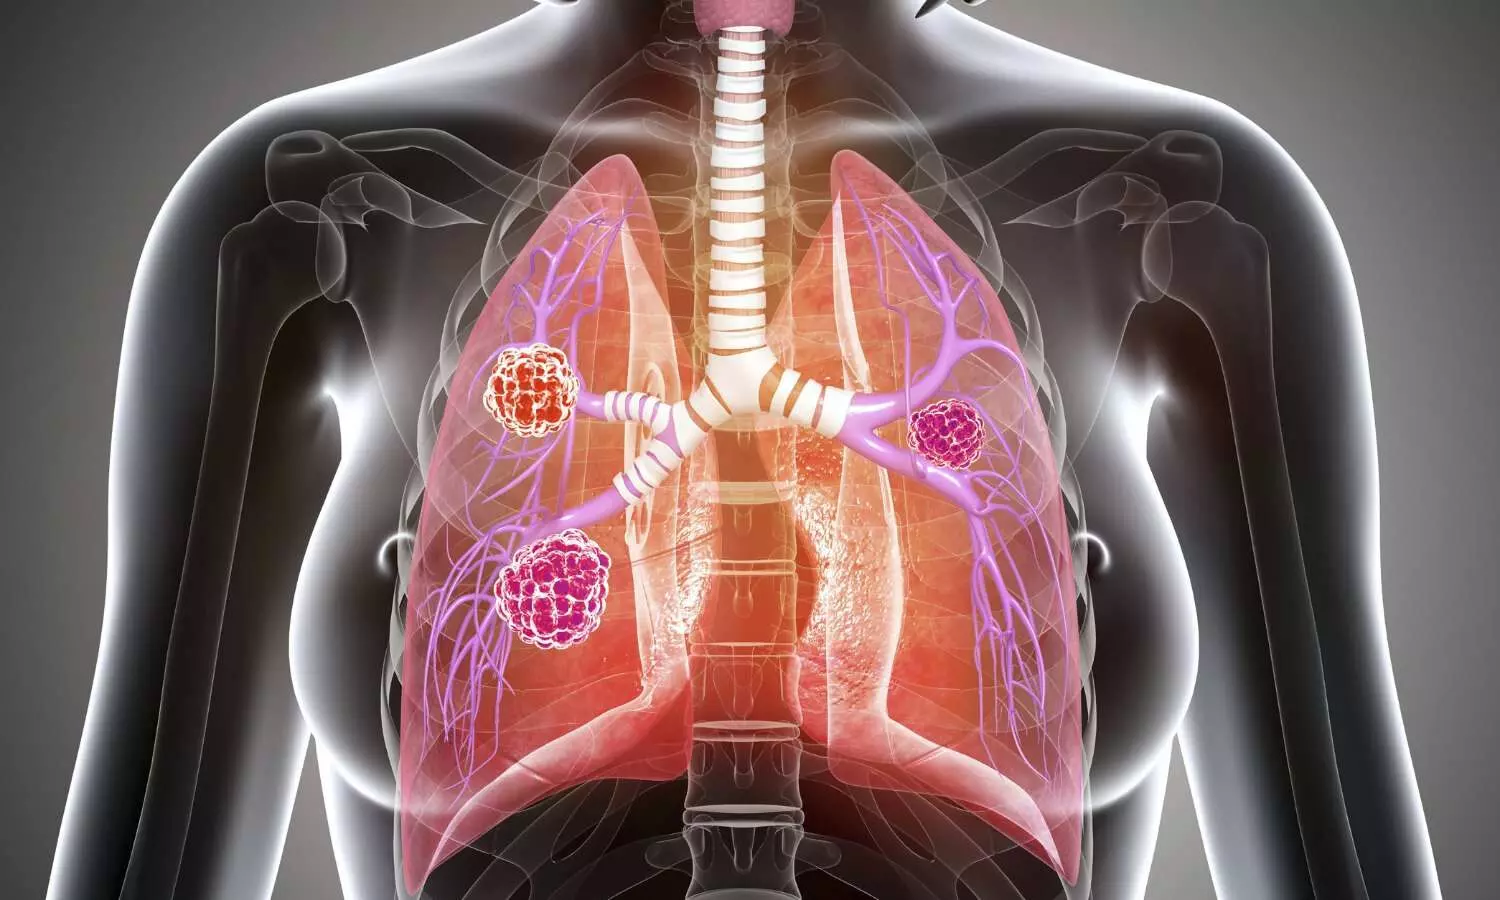 Risk-based lung cancer screening more cost-effective than age, smoking history-based screening